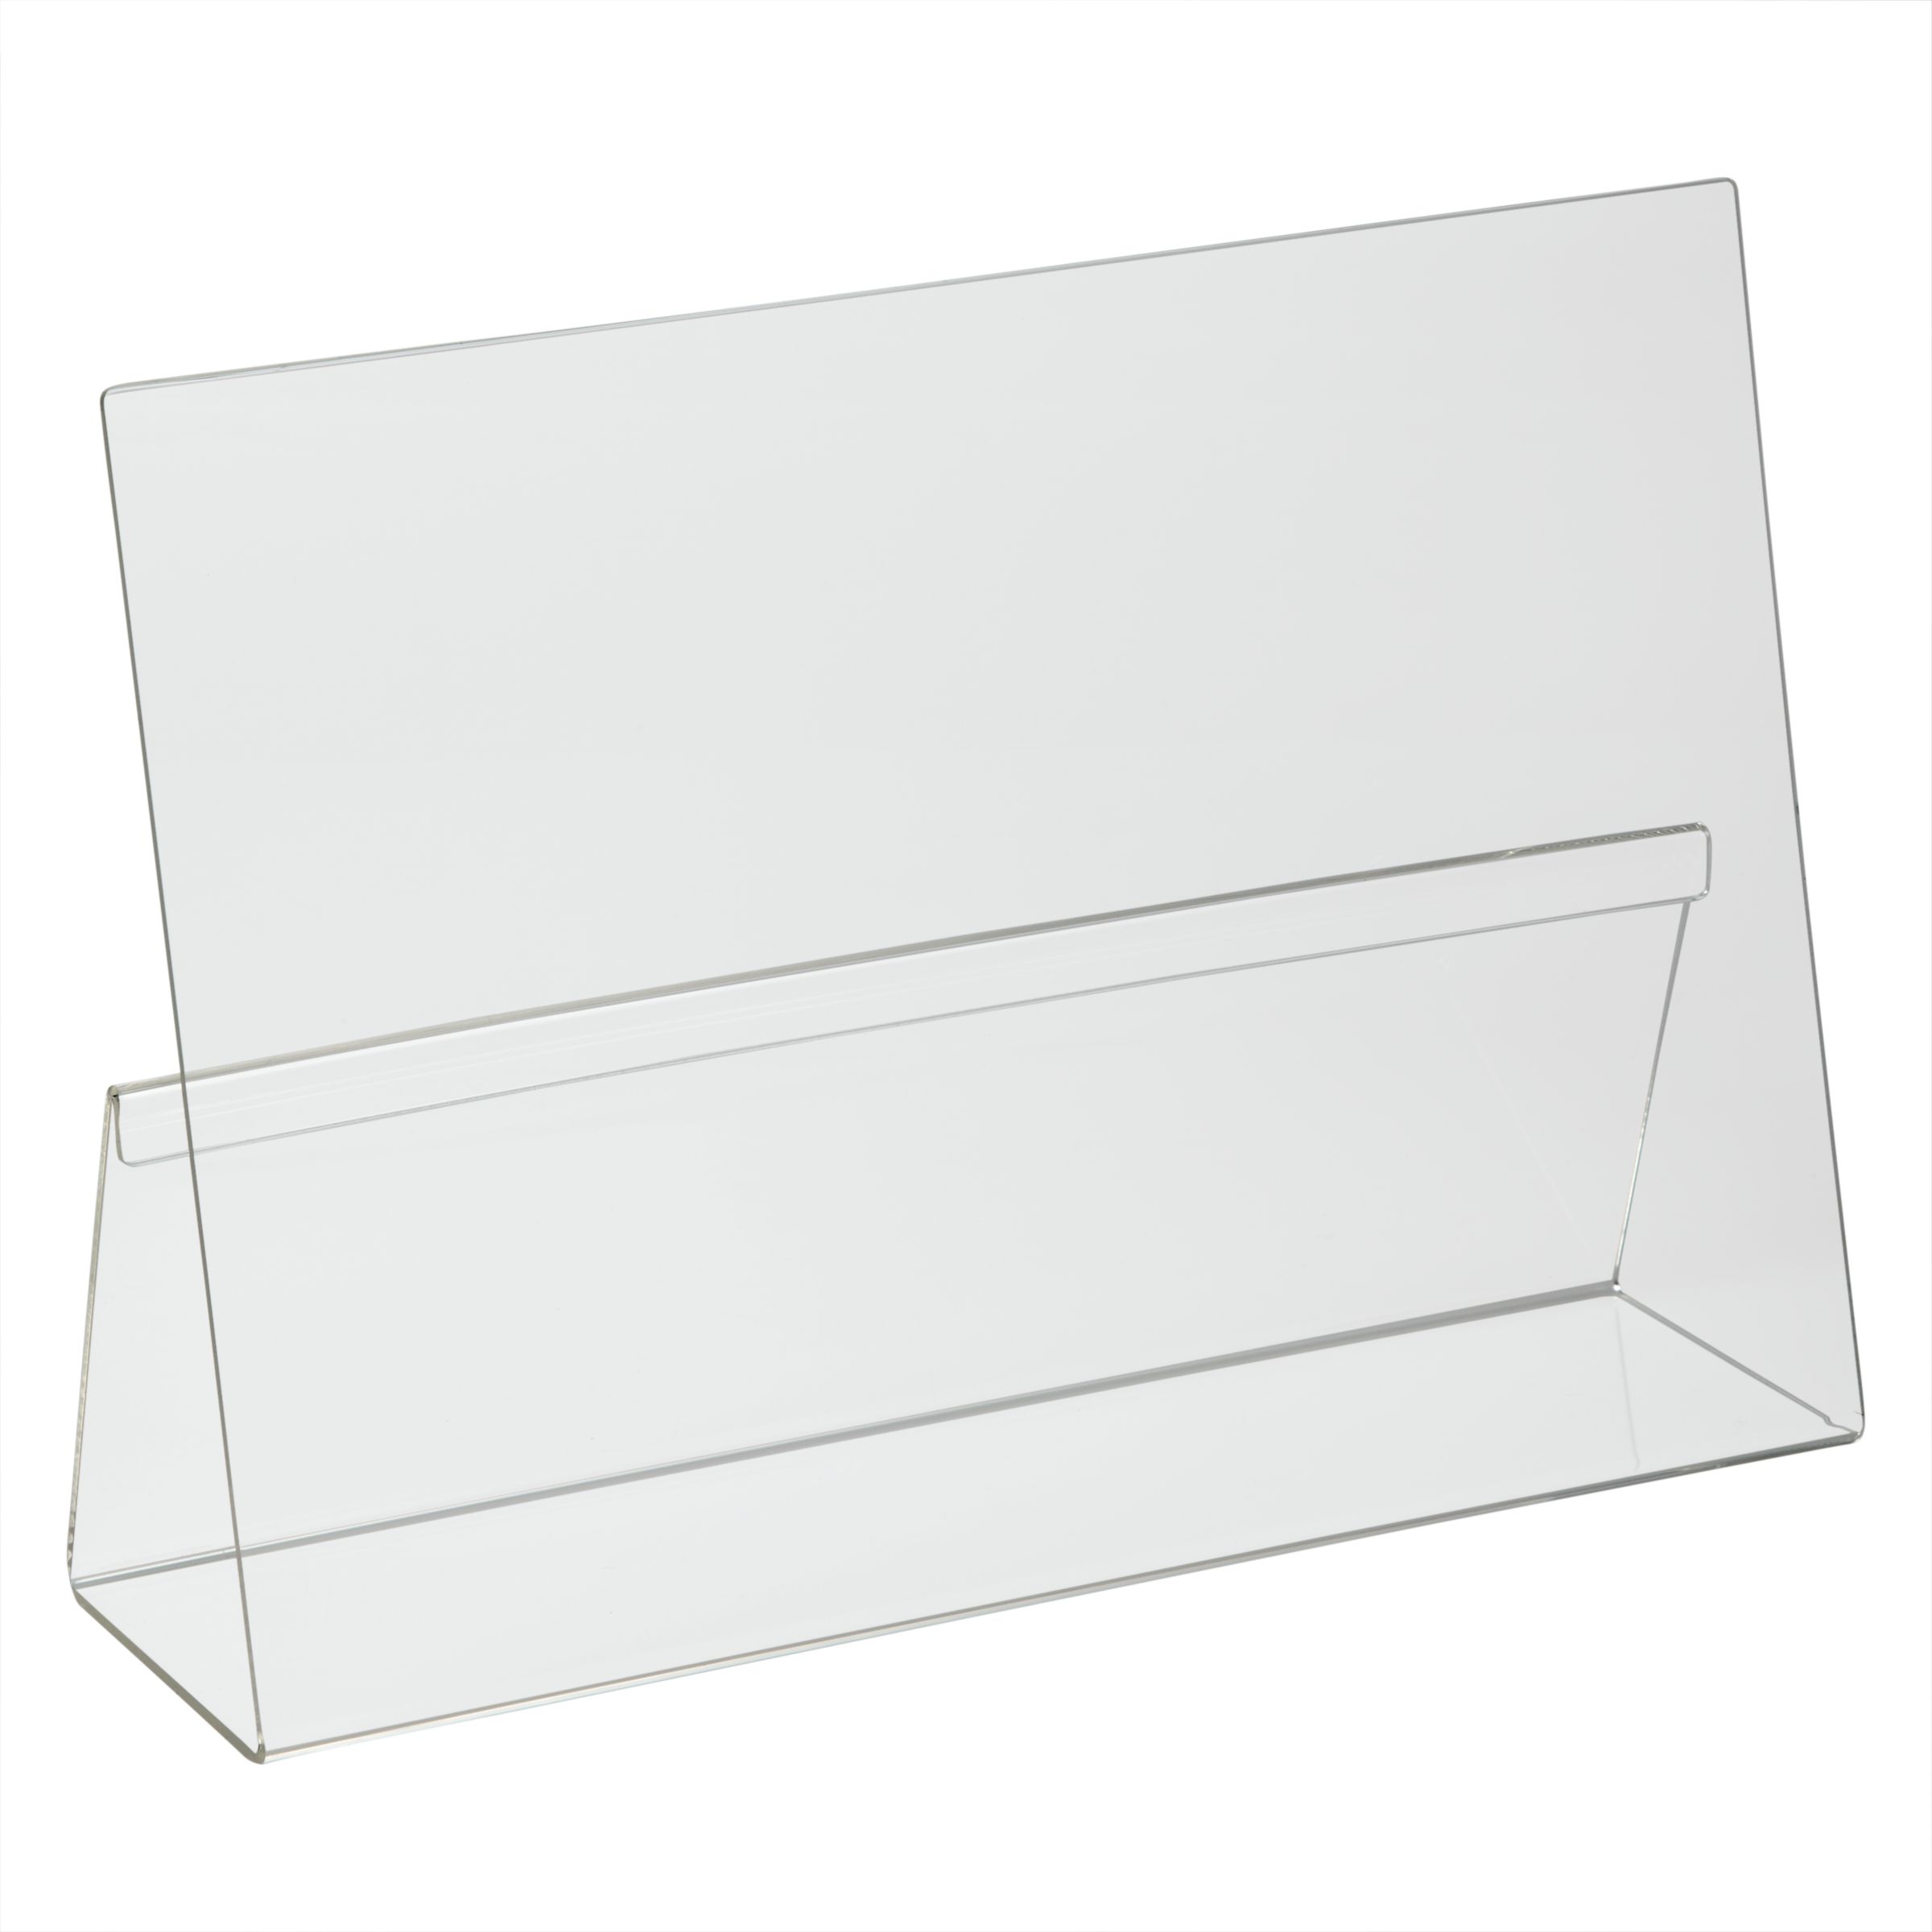 John Lewis ANYDAY Acrylic Cookbook Stand, Clear